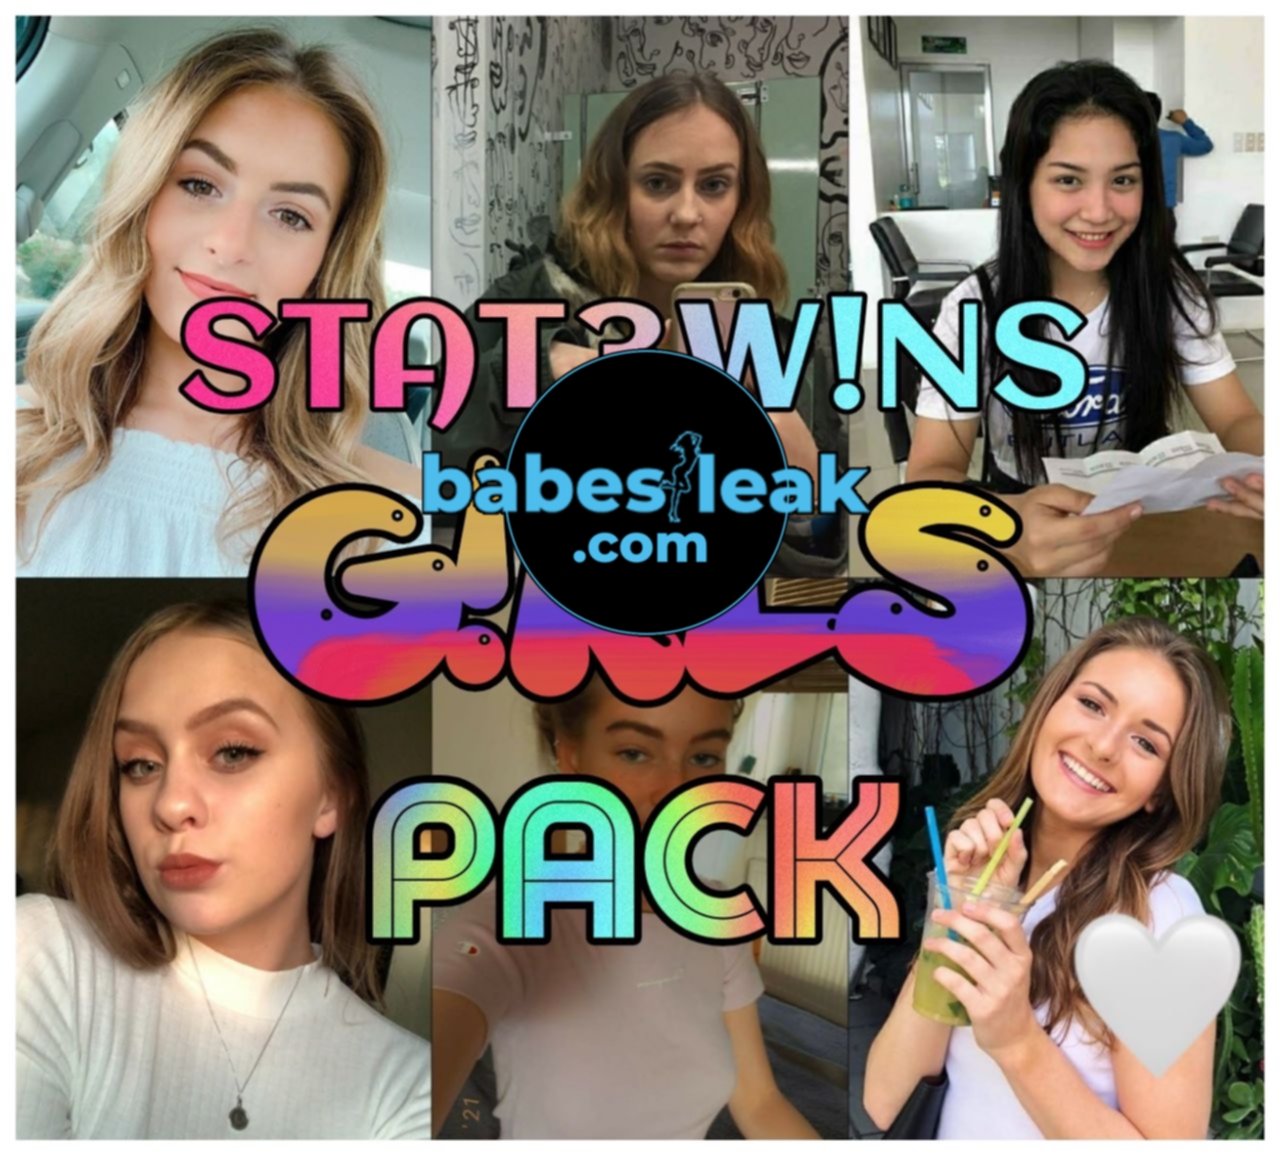 Statewins Girls Pack Stw028 Onlyfans Leaks Snapchat Leaks Statewins Leaks Teens Leaks And